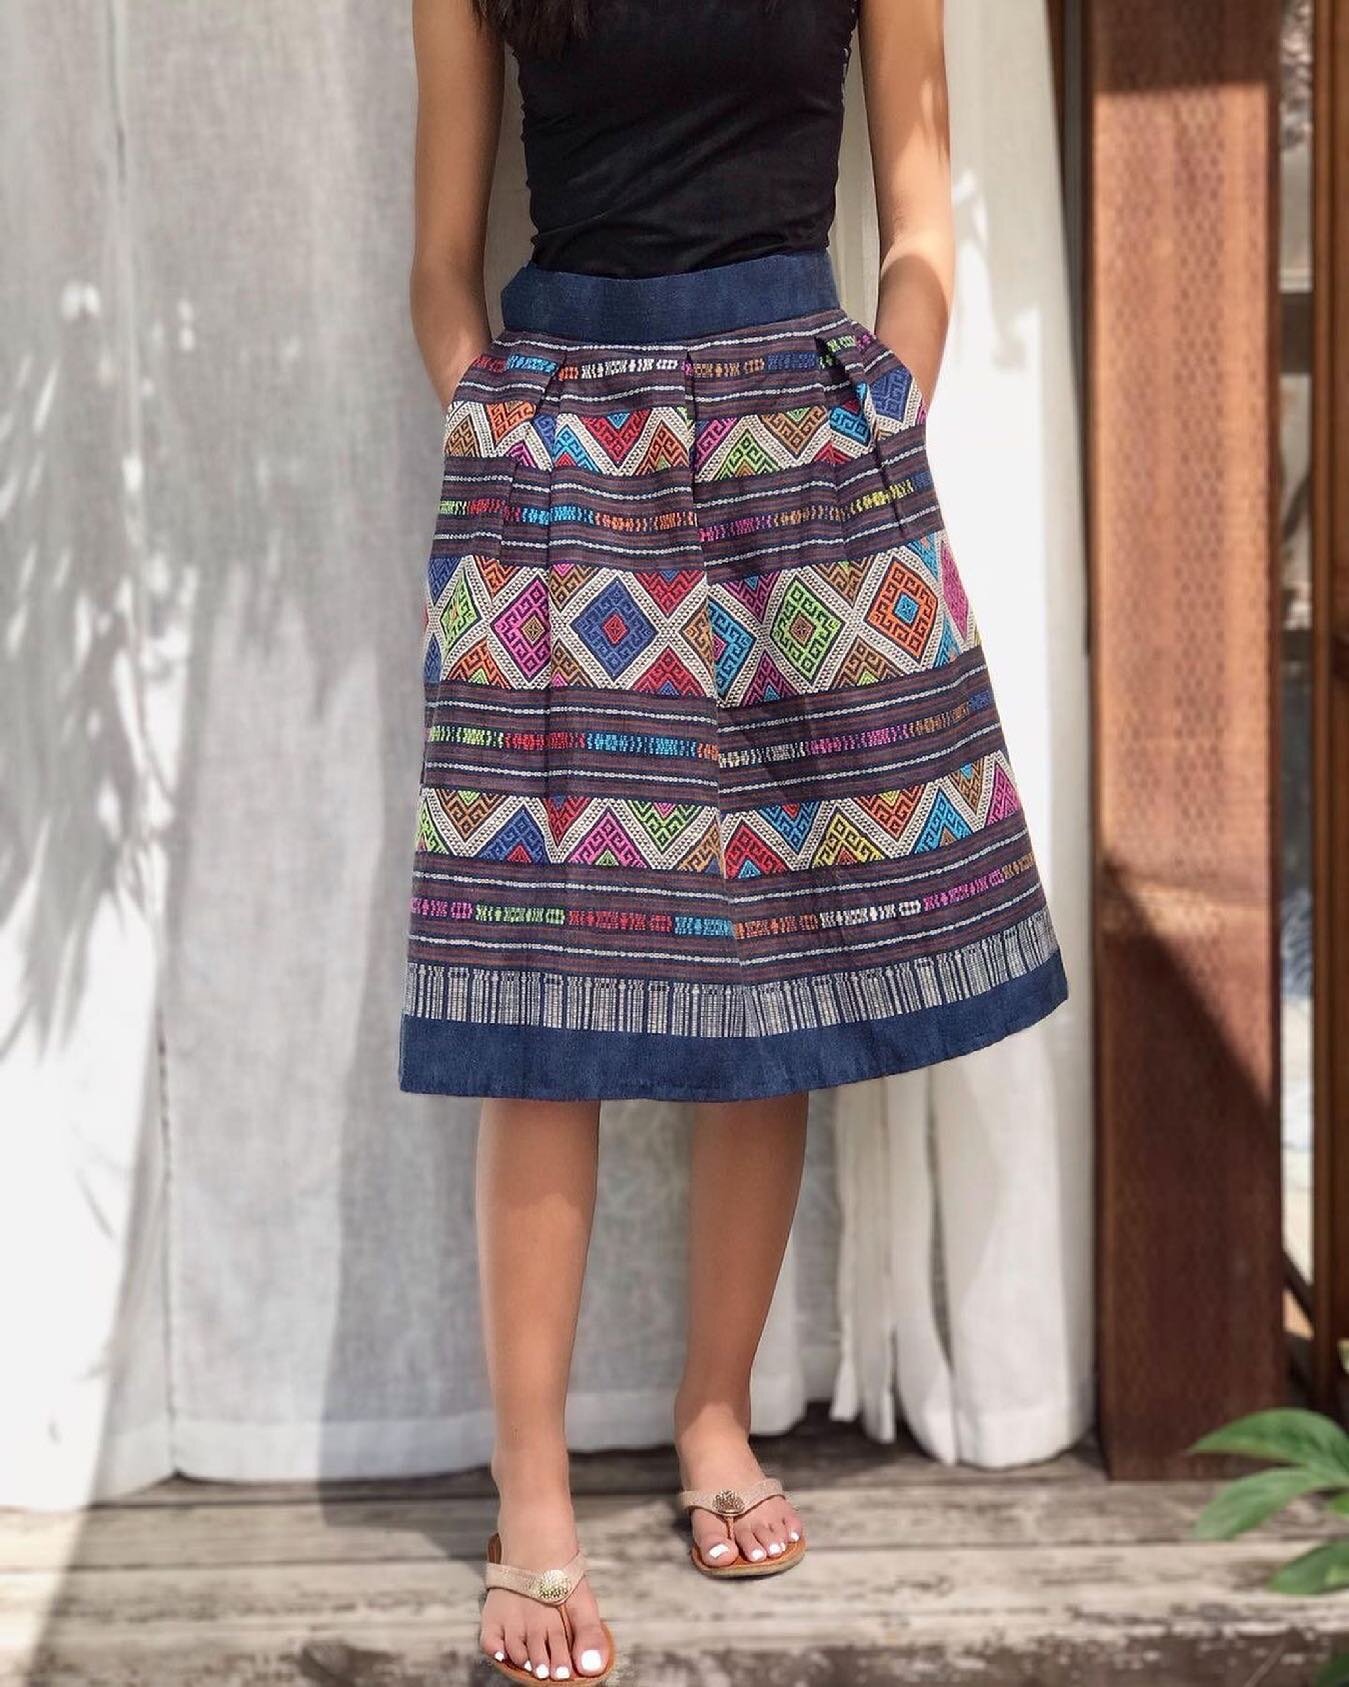 Almost time for spring fashion!

Posted @withregram &bull; @sabaidee.buatique Our summer backyard hangout with the family had a few of us in Buatique&rsquo;s skirt. 
#tailuetextiles #laos #traditionaltextiles #thailand #fashionista #fashionblogger #l